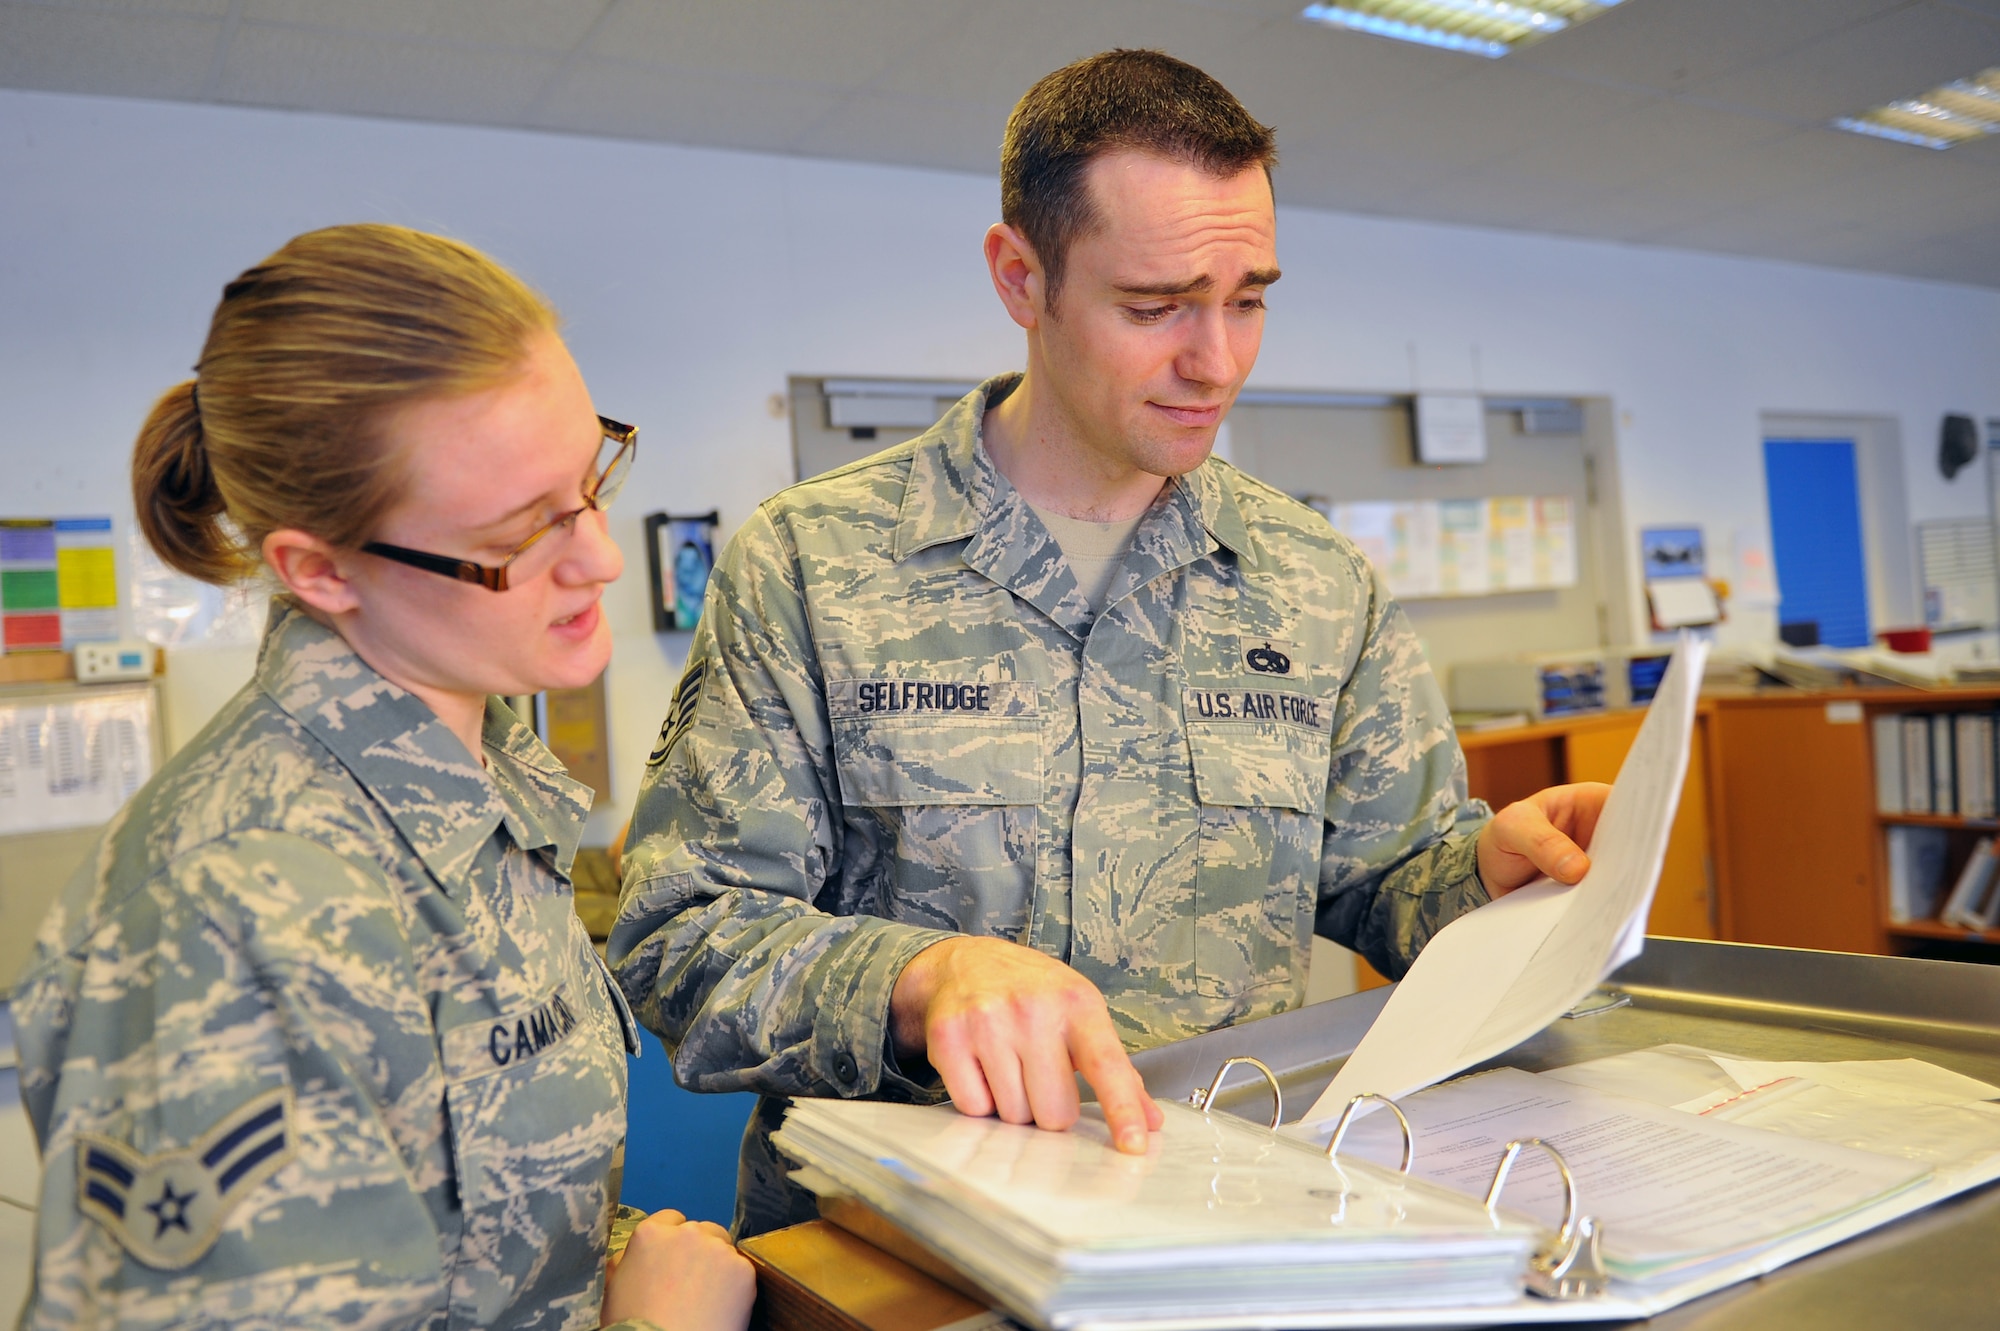 SPANGDAHLEM AIR BASE, Germany – Staff Sgt. Michael Selfridge, right, 52nd Maintenance Operations Squadron aircraft maintenance inspector, checks work programs with Airman 1st Class Katelyn Camacho, 52nd Equipment Maintenance Squadron phase support section member, during an inspection inside Bldg. 346 here March 8. The AMXS quality assurance section is made up of eight certified maintenance inspectors who inspect 81st and 480th Fighter Squadron aircraft maintenance processes. Quality assurance modernizes the Air Force’s aircraft and equipment maintenance and training by tracking maintenance performance against metrics to improve efficiency, production, and reliability.  (U.S. Air Force photo by Airman 1st Class Dillon Davis/Released)